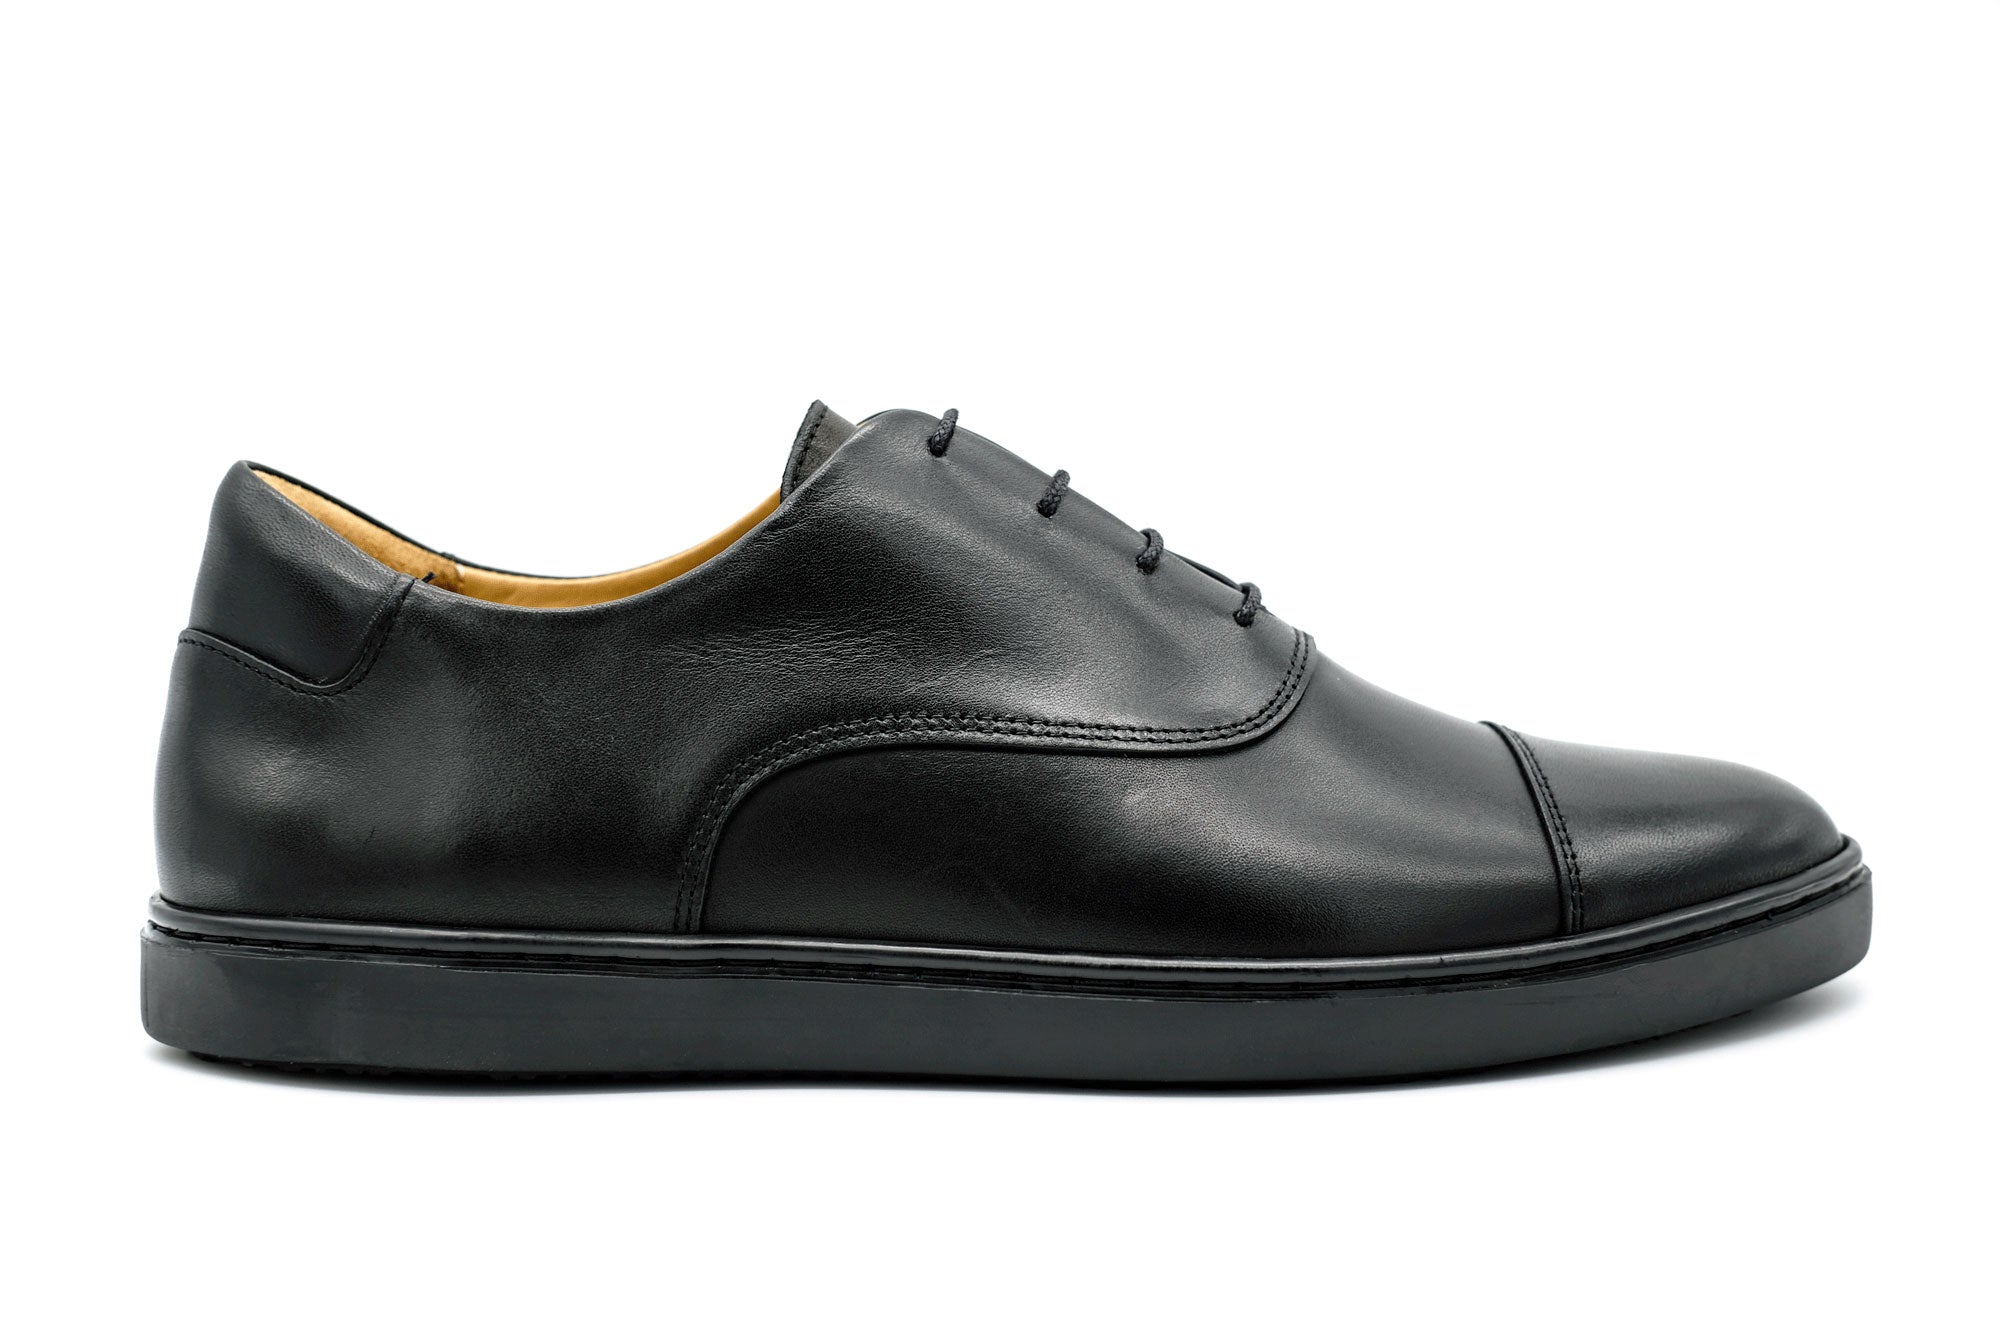 sneakers that look like dress shoes